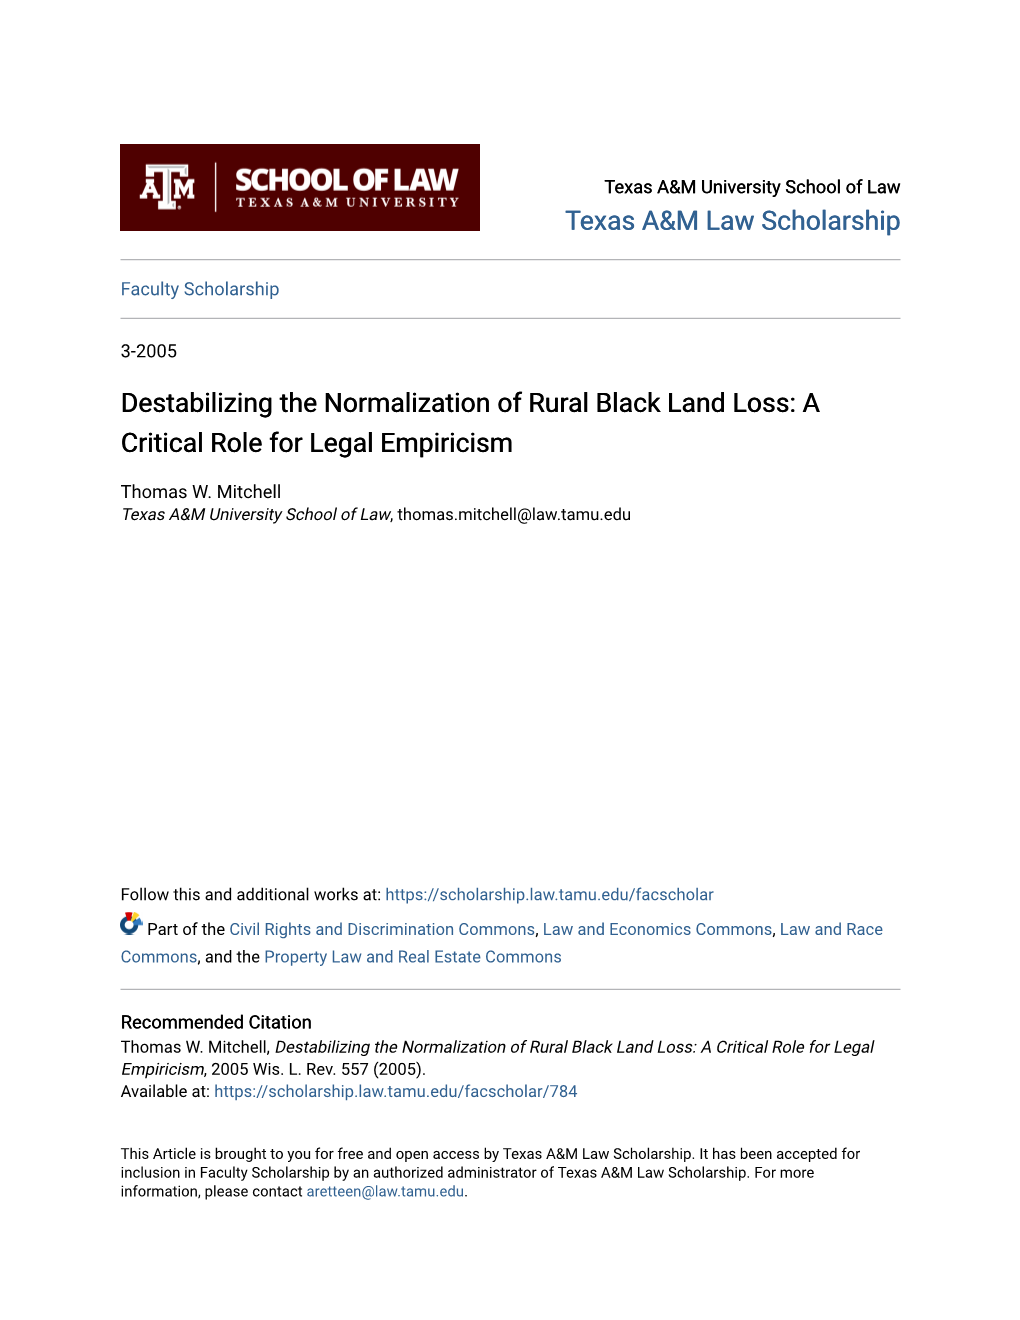 Destabilizing the Normalization of Rural Black Land Loss: a Critical Role for Legal Empiricism